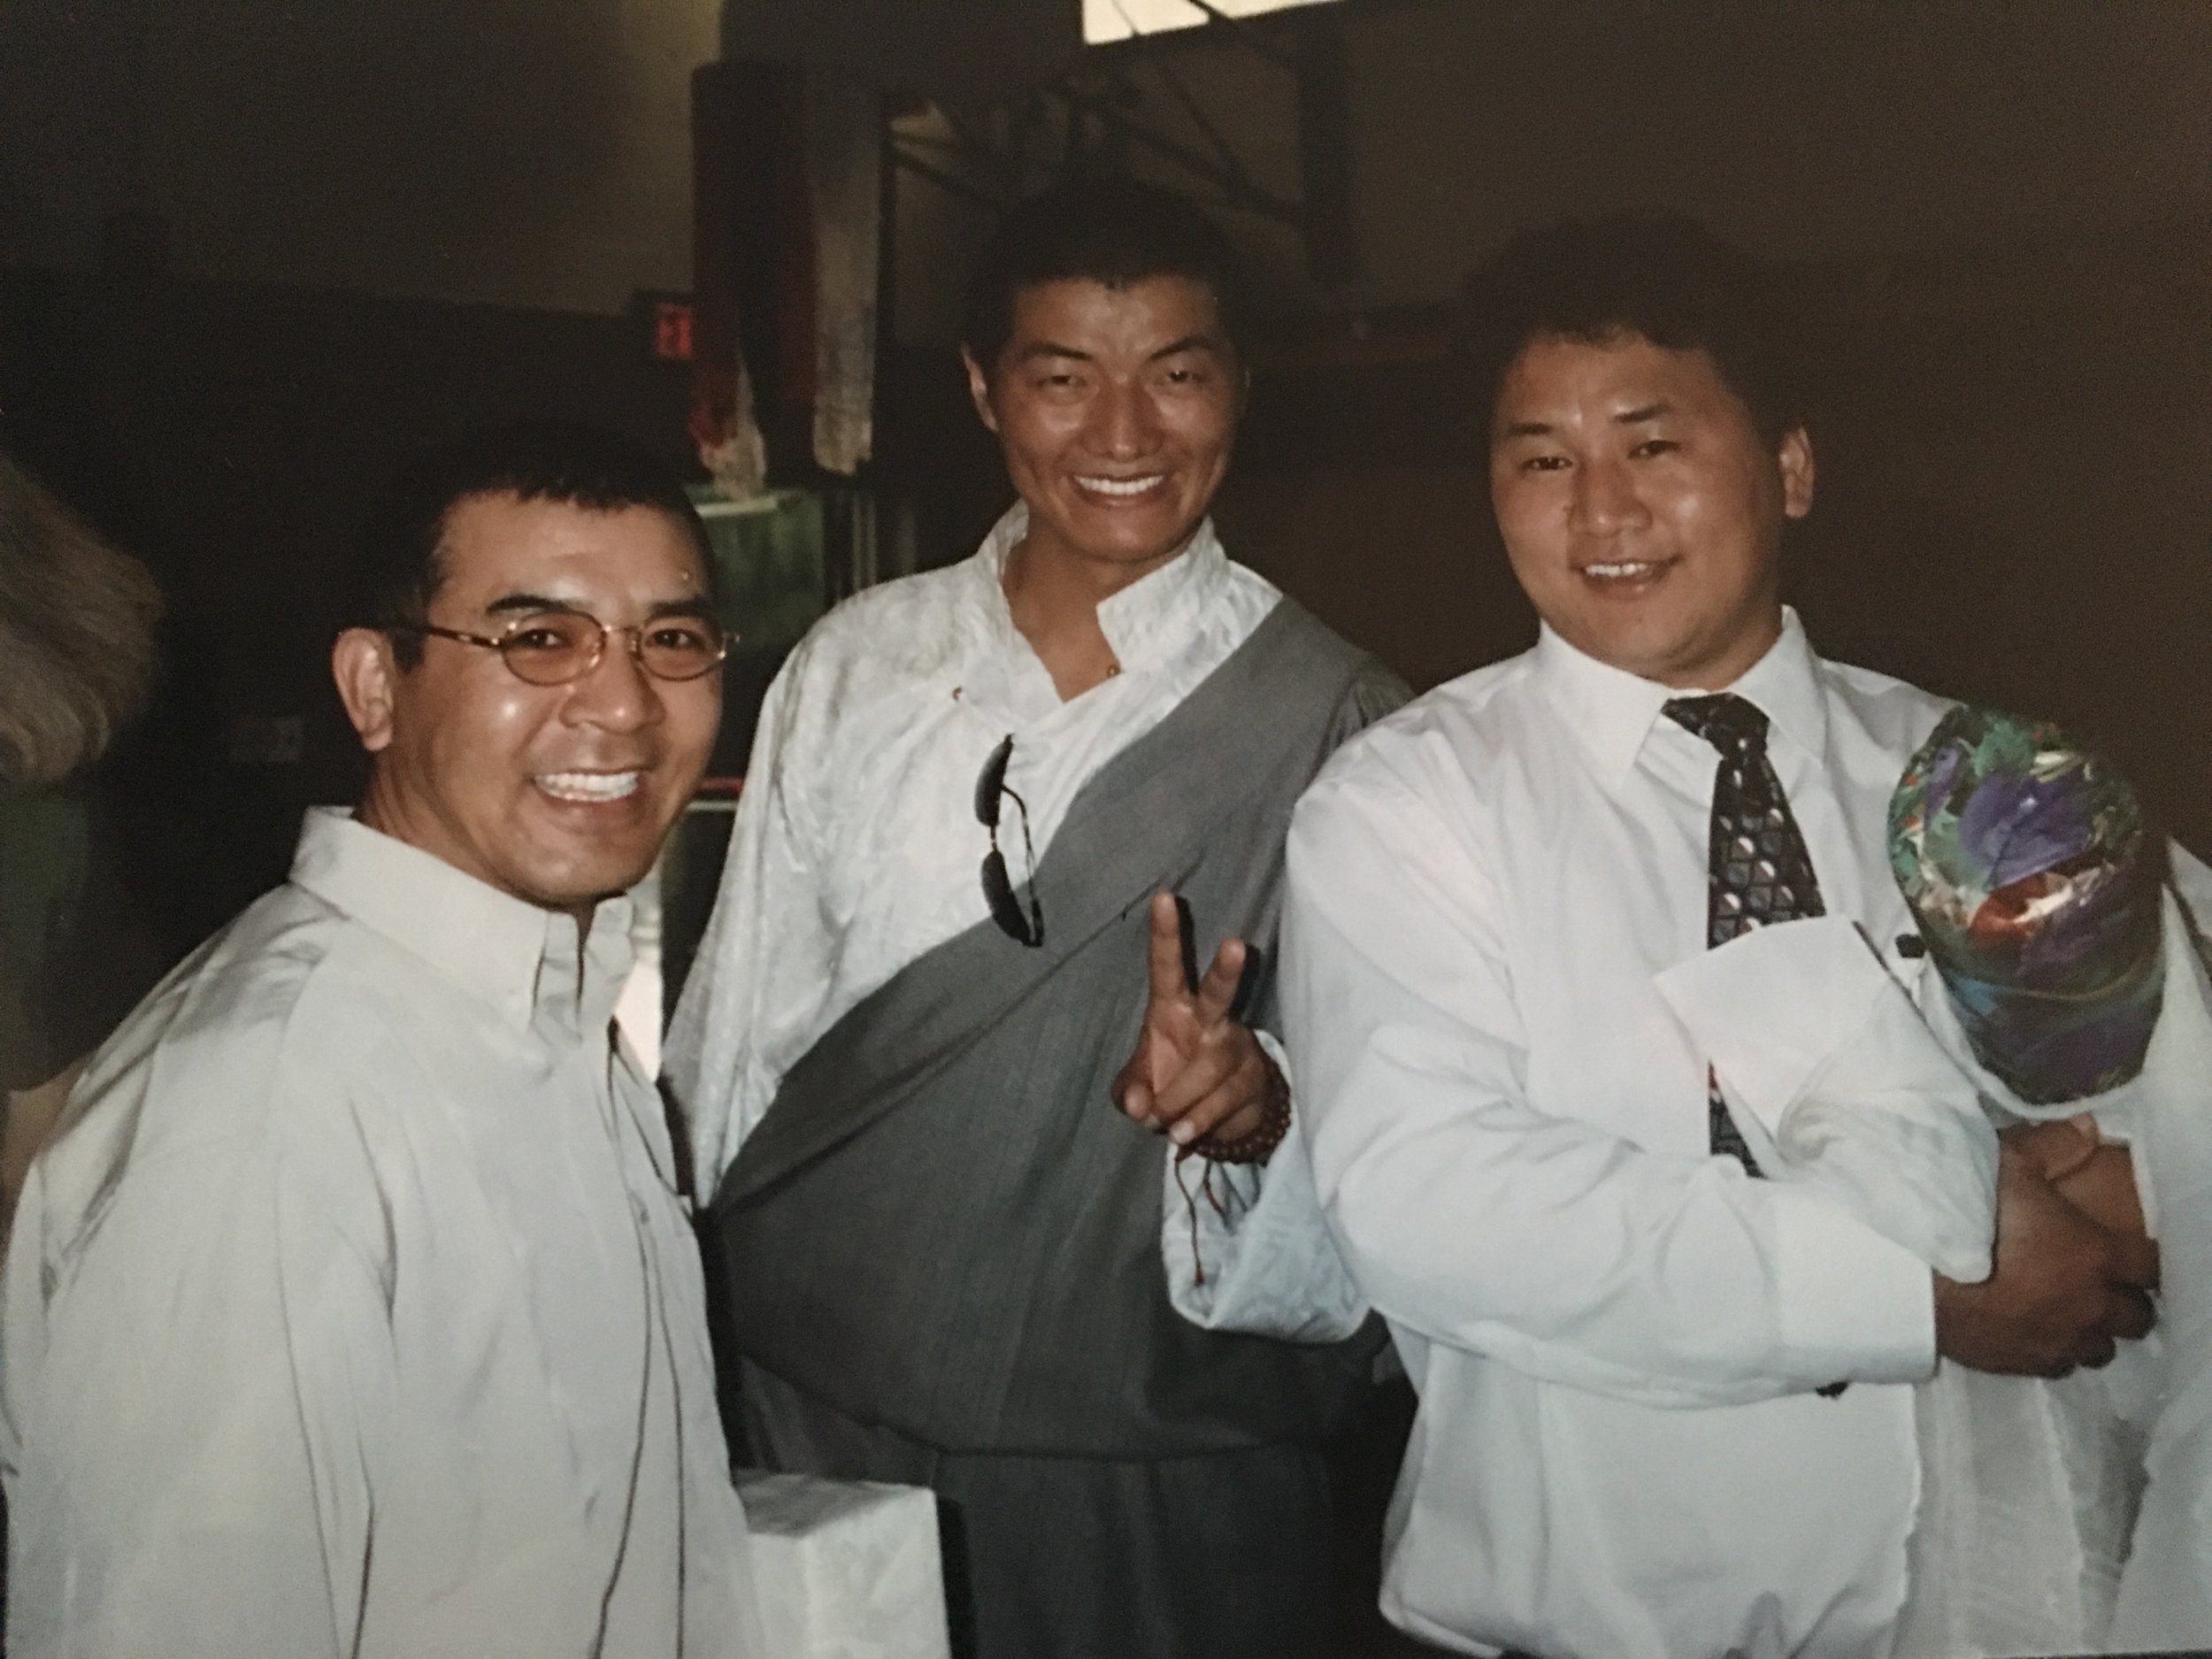 Boston Tibetan Community with our Sikhyong Lobsang Sangay back in the early days 